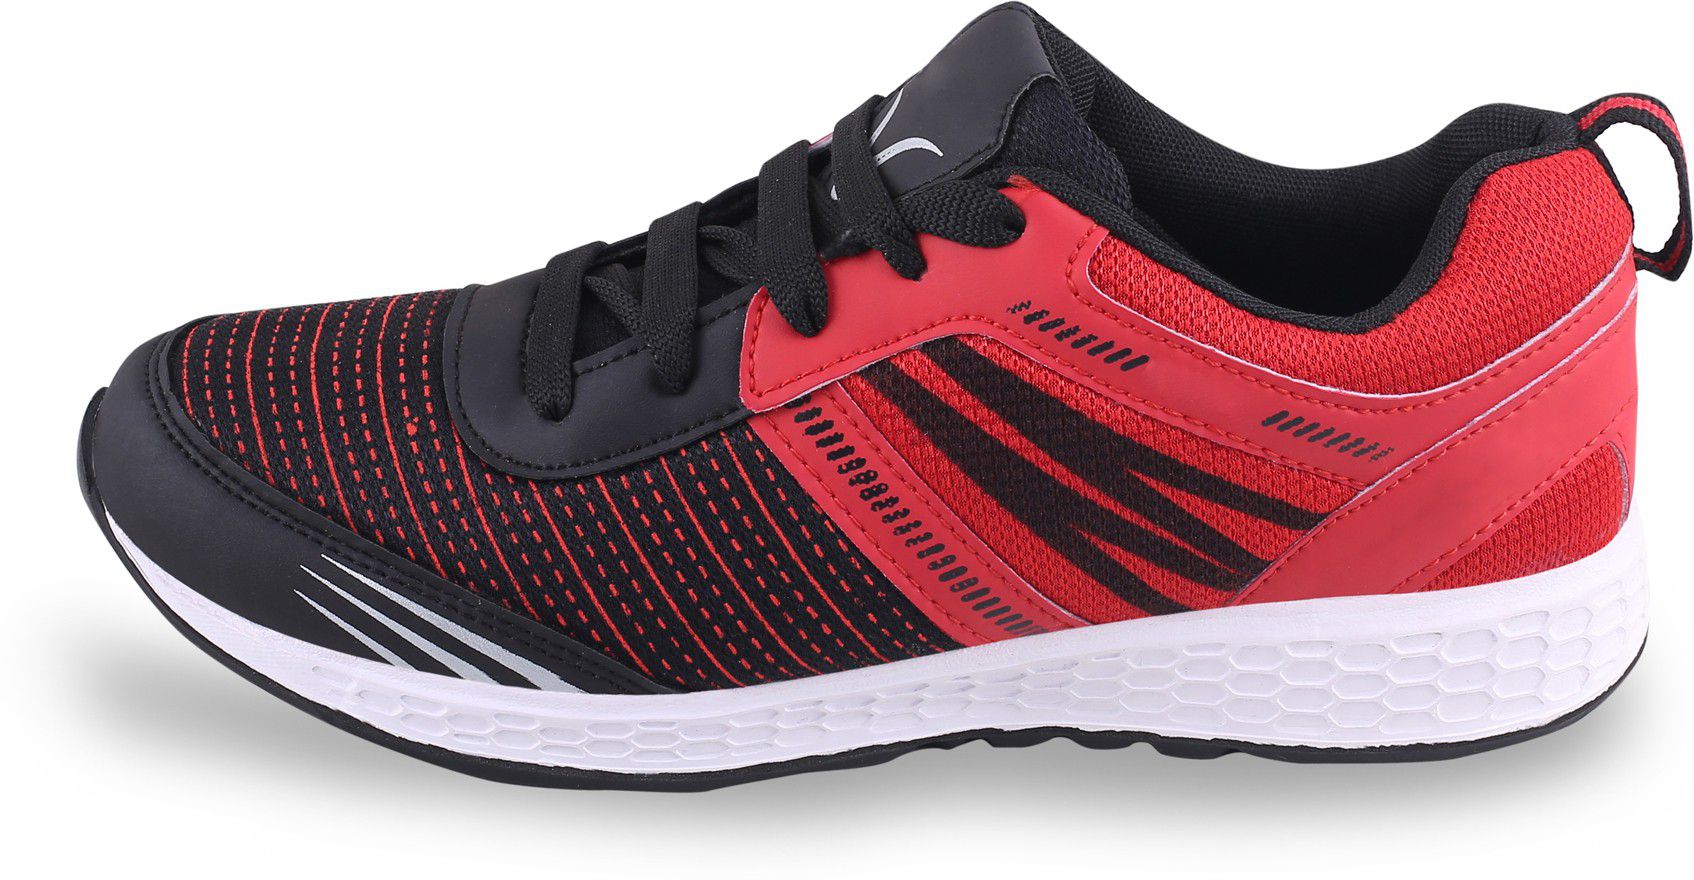 Density Red Training Shoes - Buy Density Red Training Shoes Online at ...